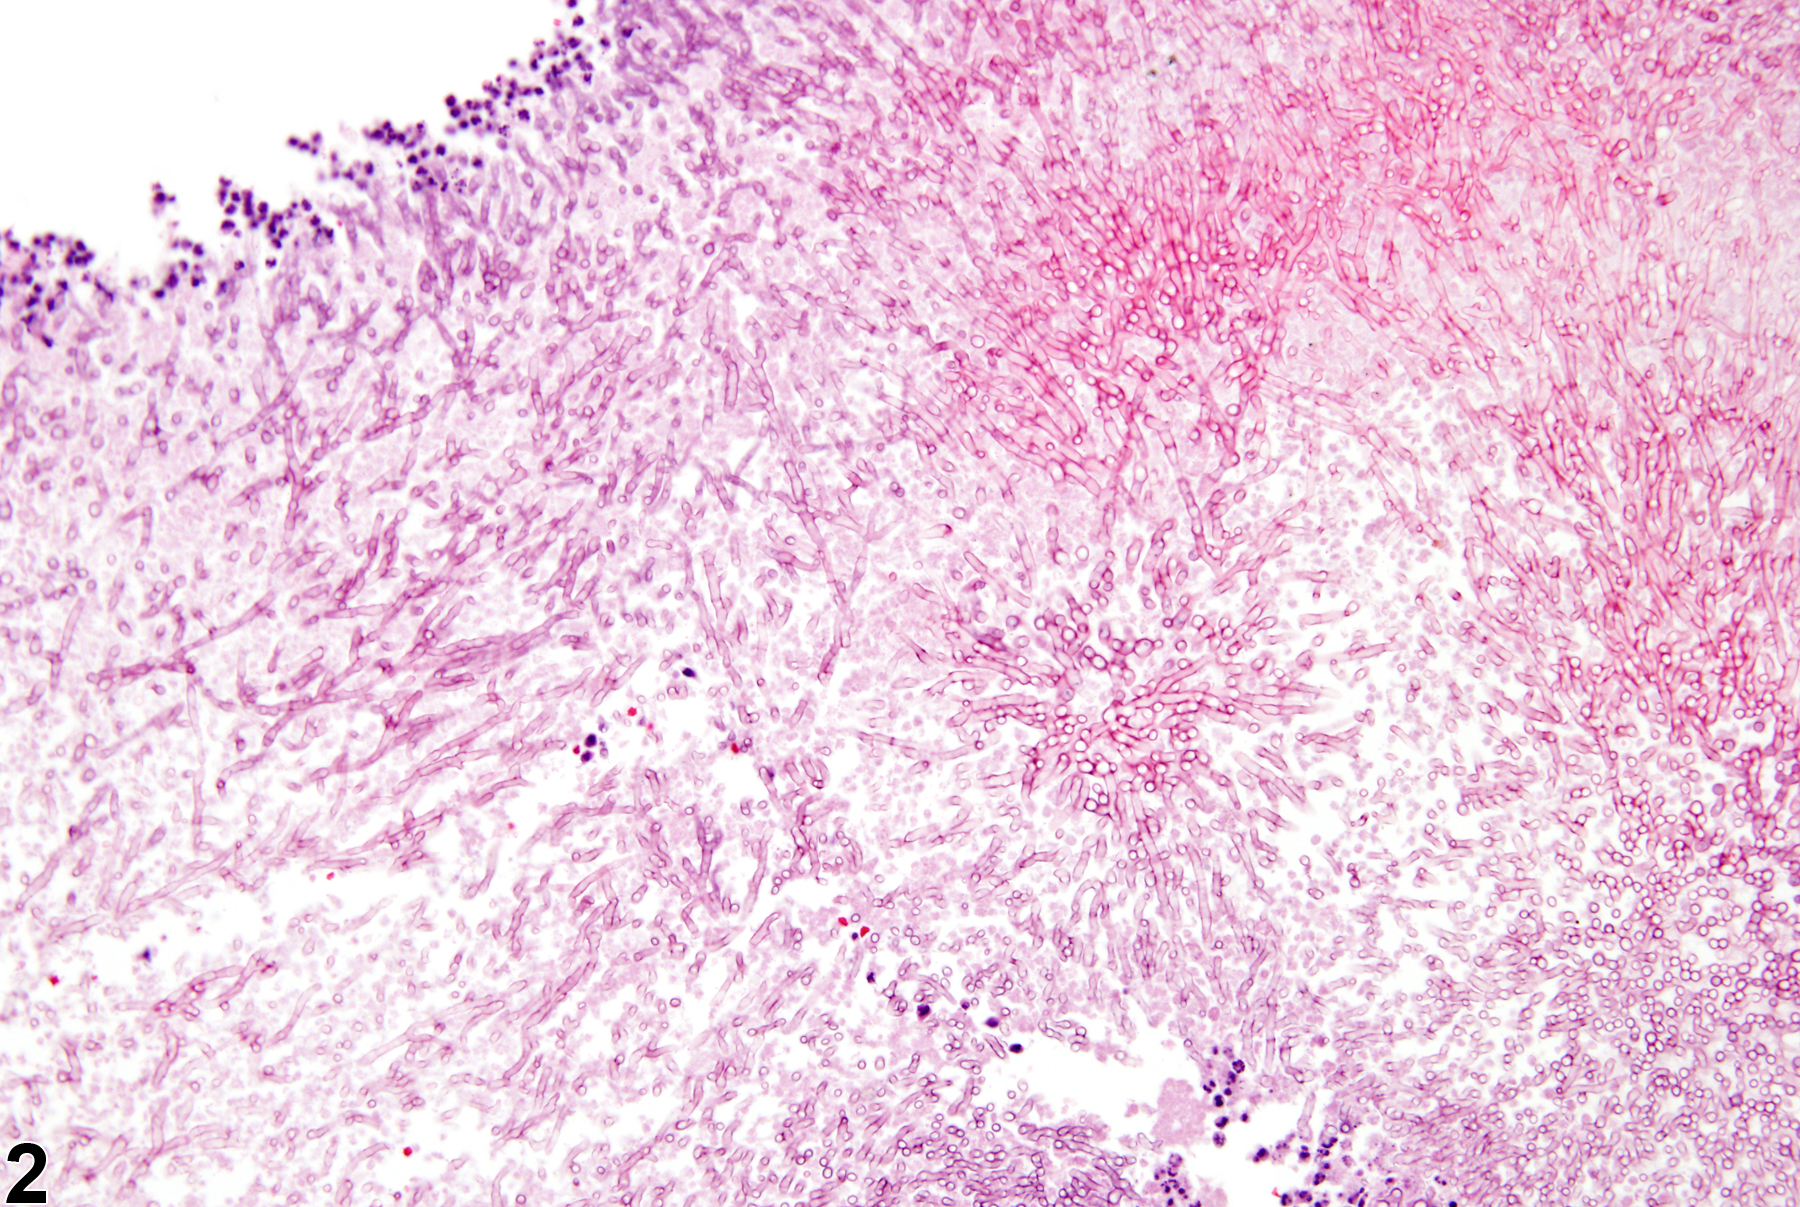 Image of fungus in the nose from a male F344/N rat in a chronic study